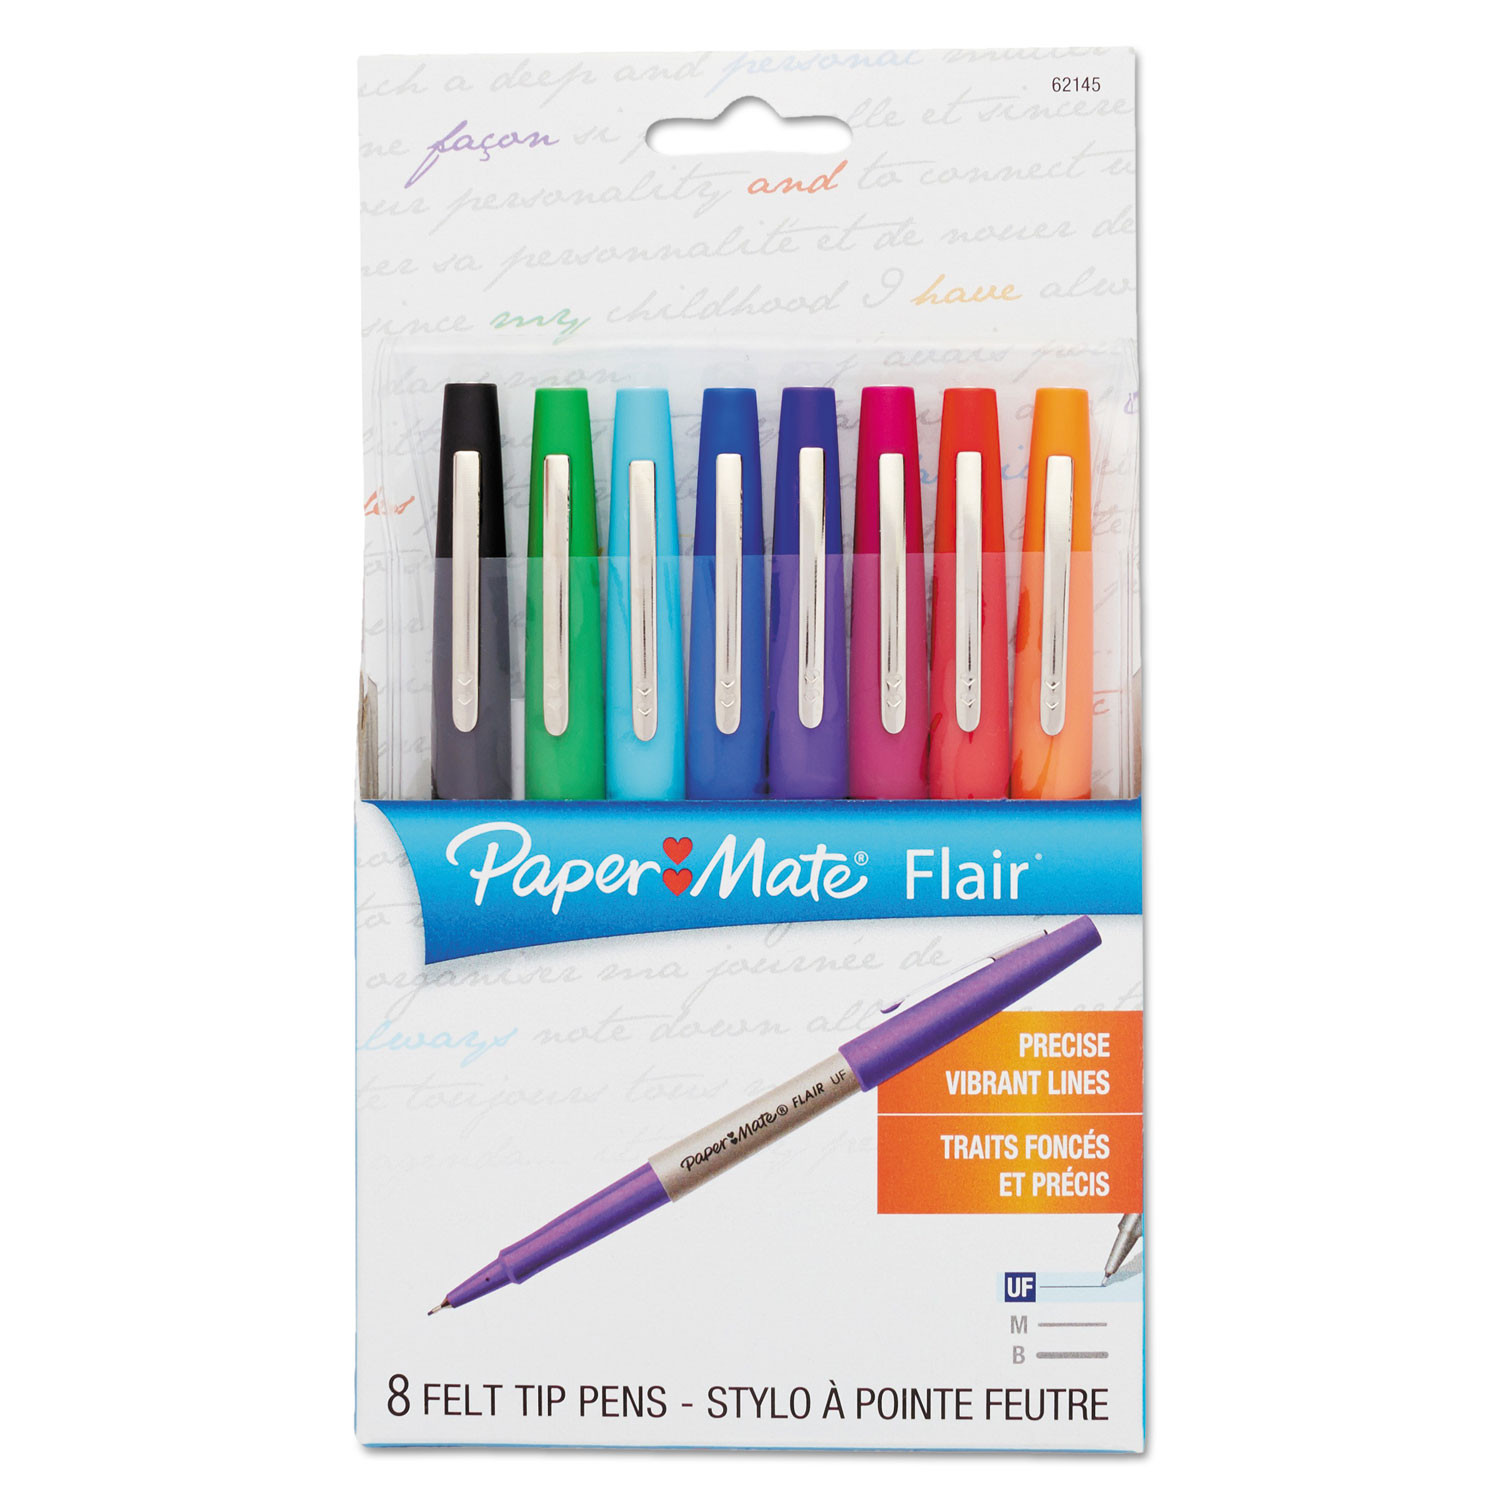 Flair Felt Tip Markers, Assorted Tropical Colors, Pack of 12